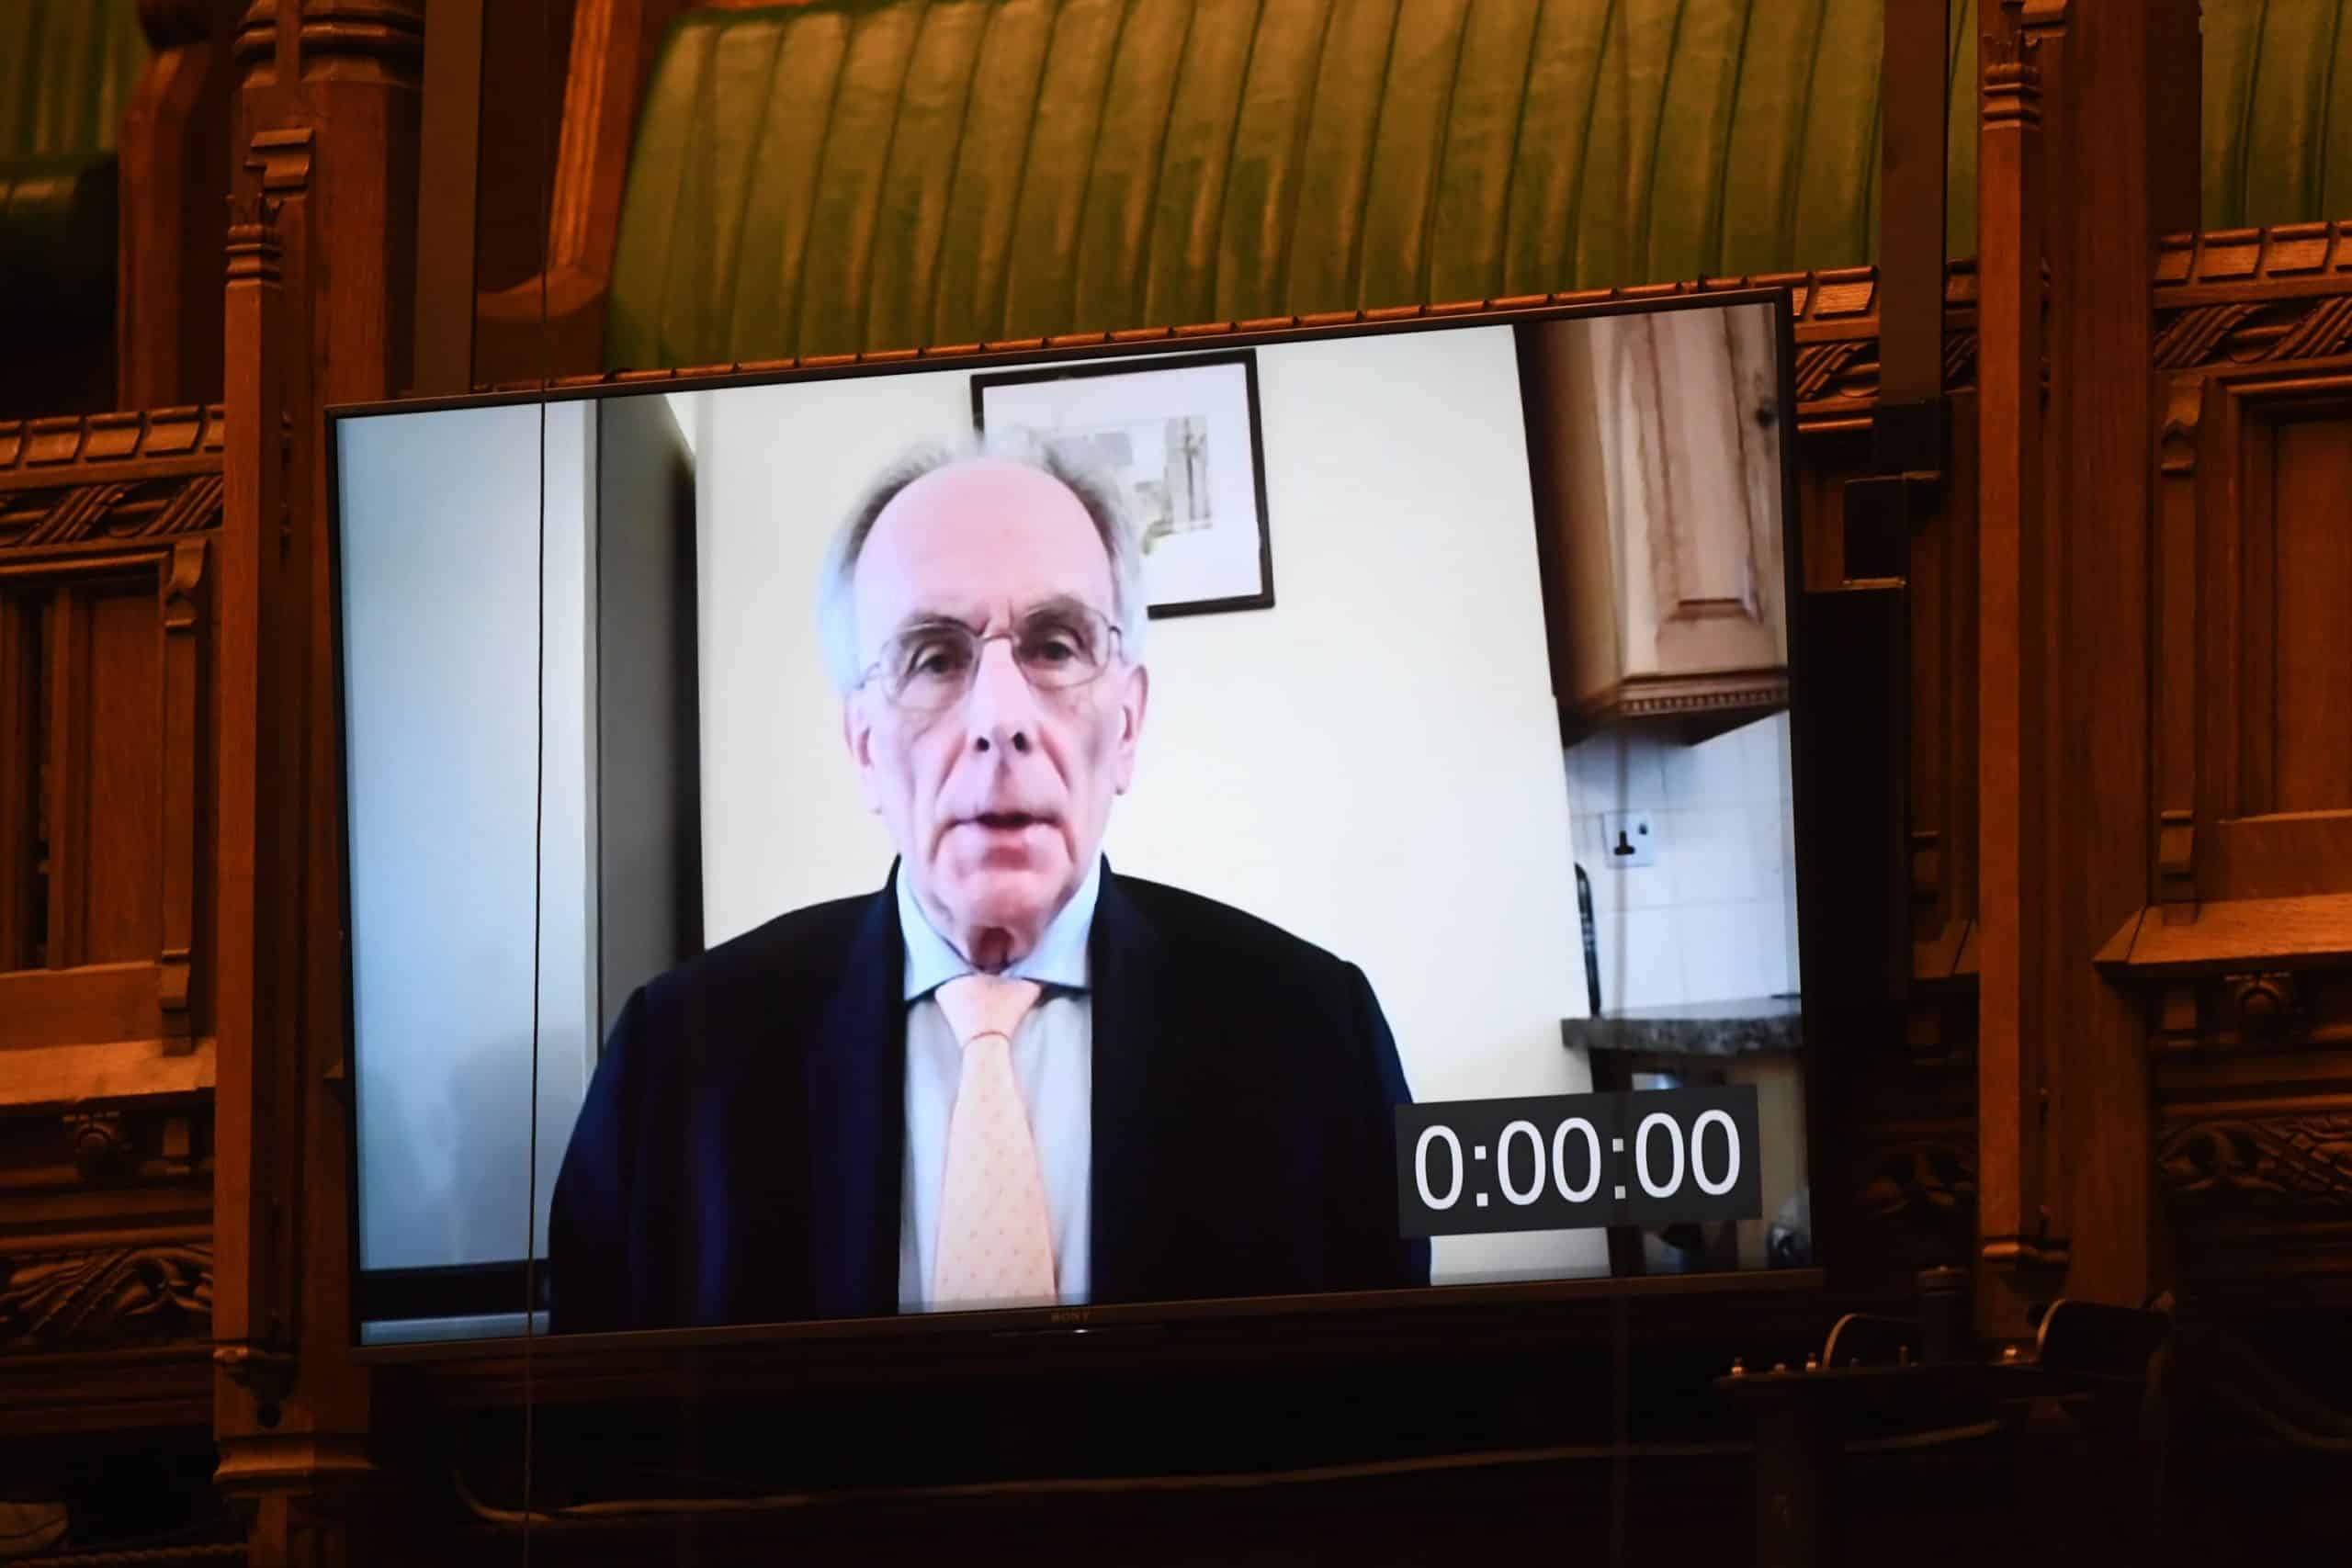 MP dials in via video link to urge the end of virtual Parliament – as Rees-Mogg defends voter ID